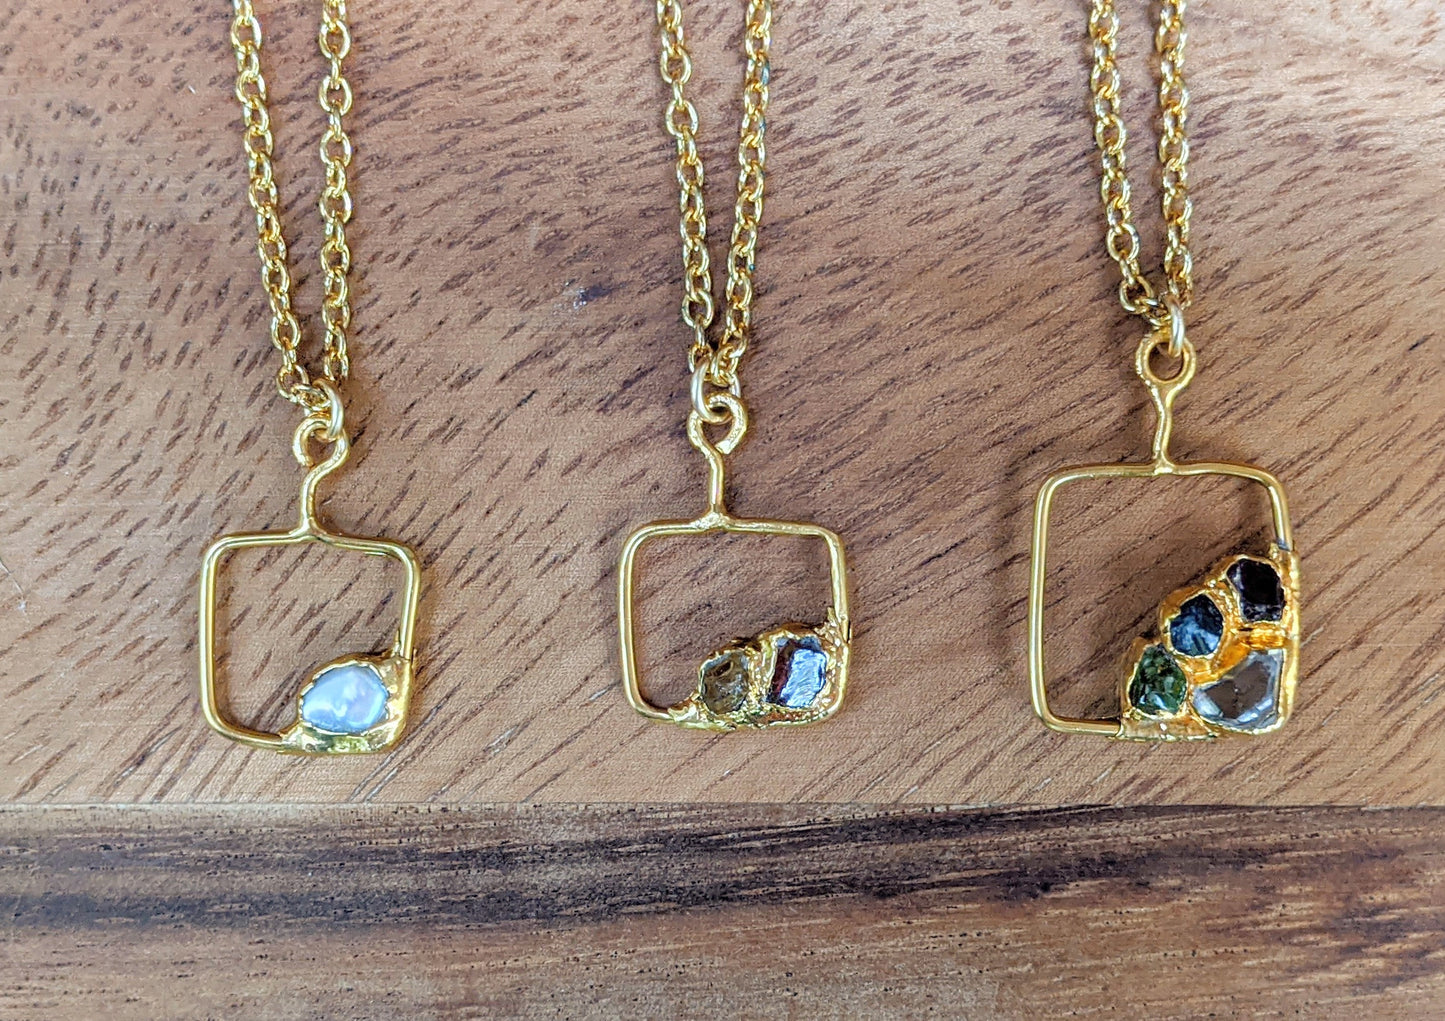 Personalized Family Birthstone necklace in unique 18k Gold setting